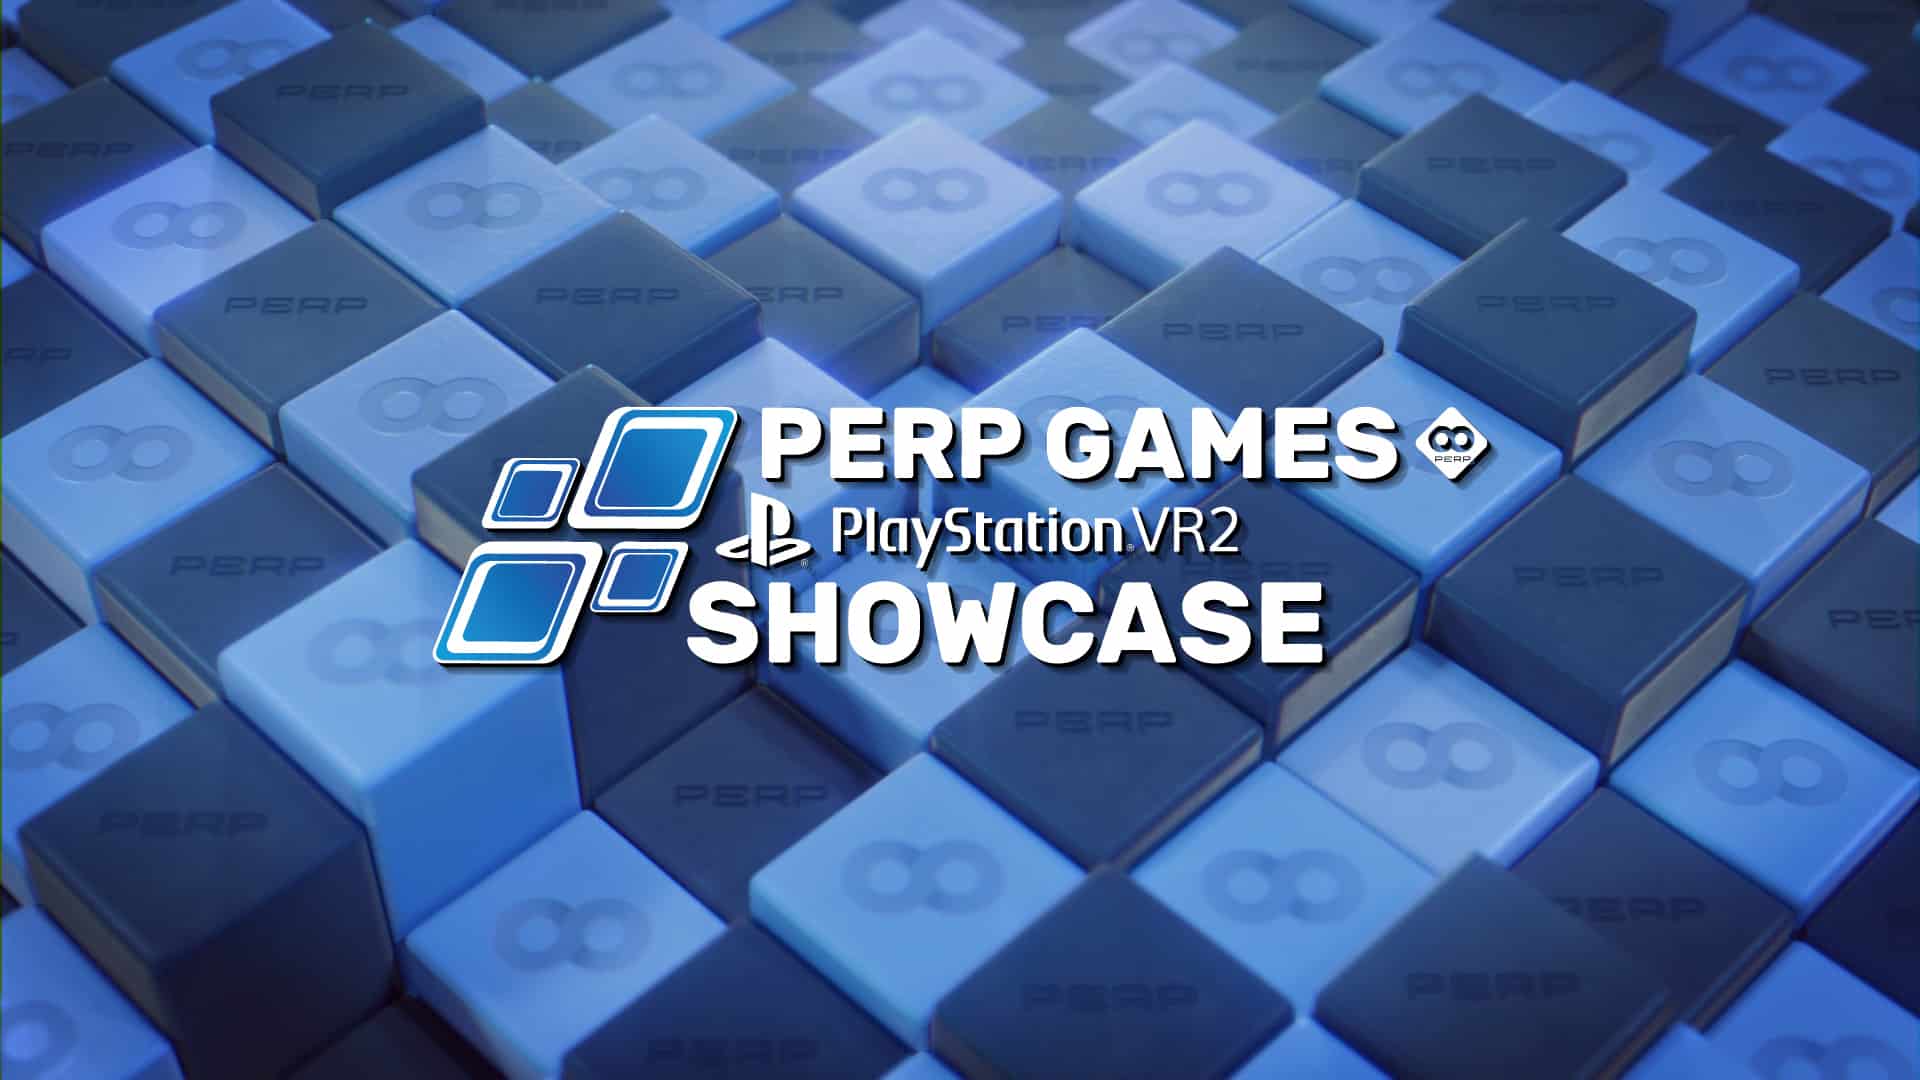 Sony Announces PlayStation Showcase for Next Week - IGN